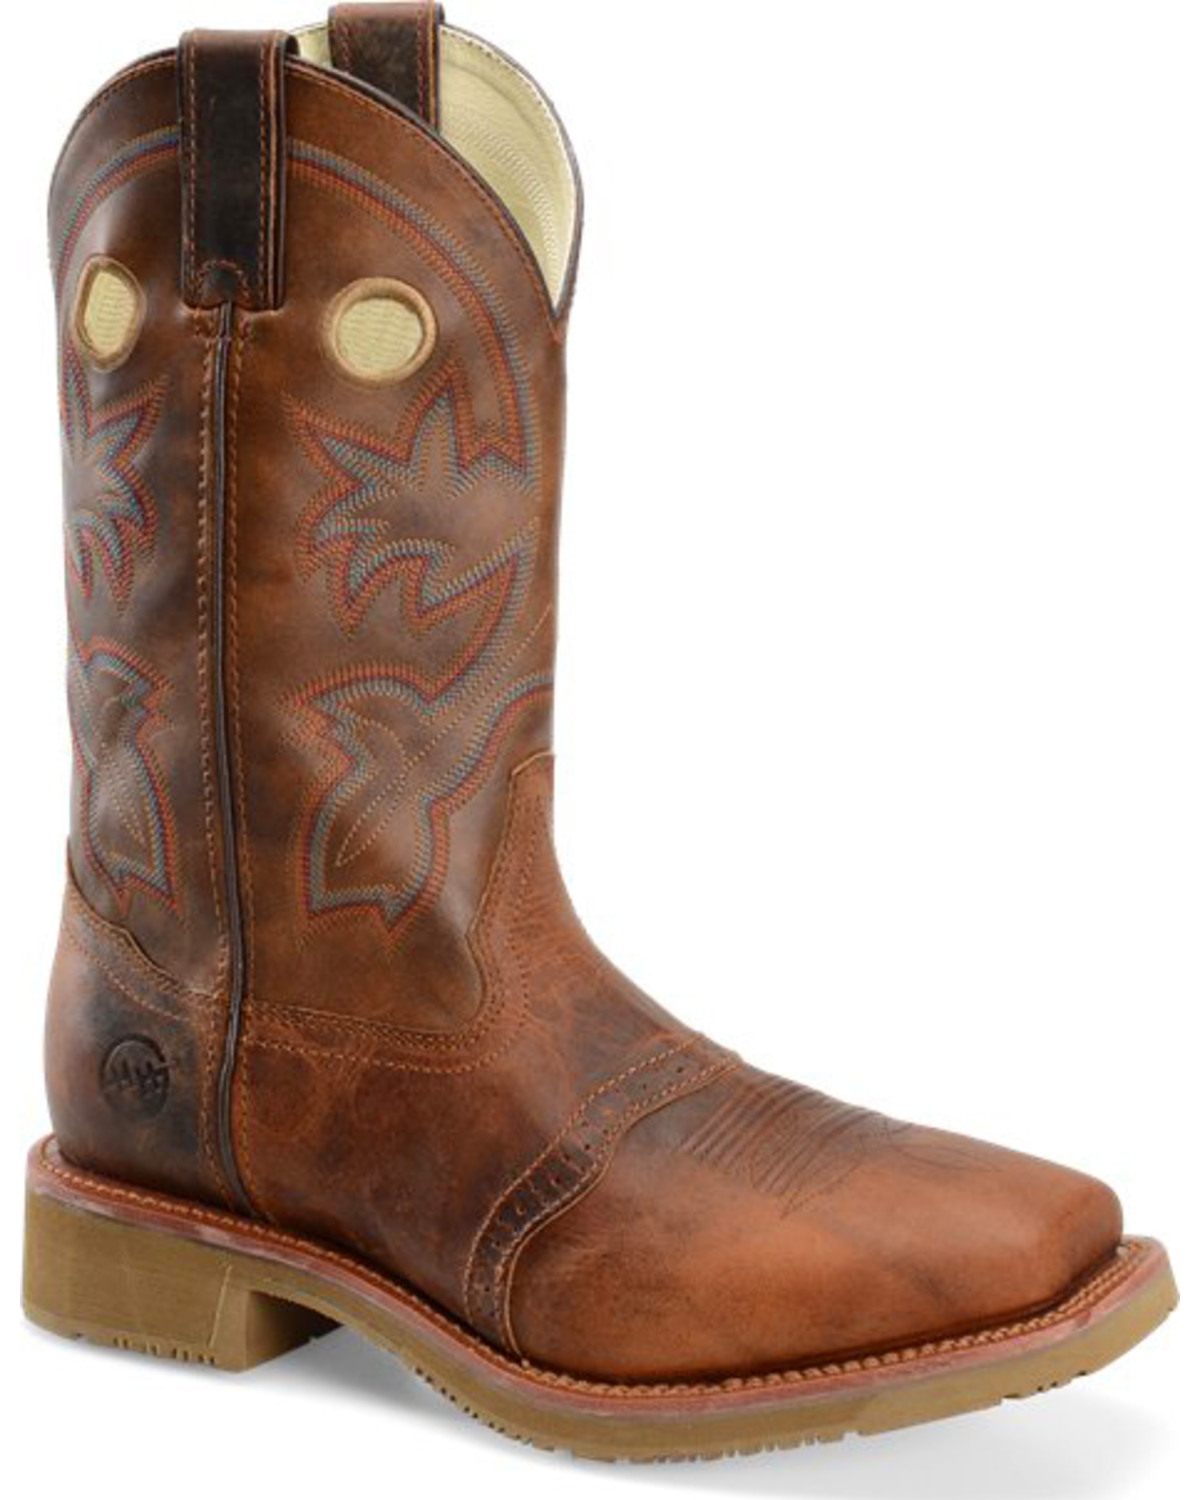 Double H Men's 11" Earthquake Rust ICE Western Work Boots - Square Toe